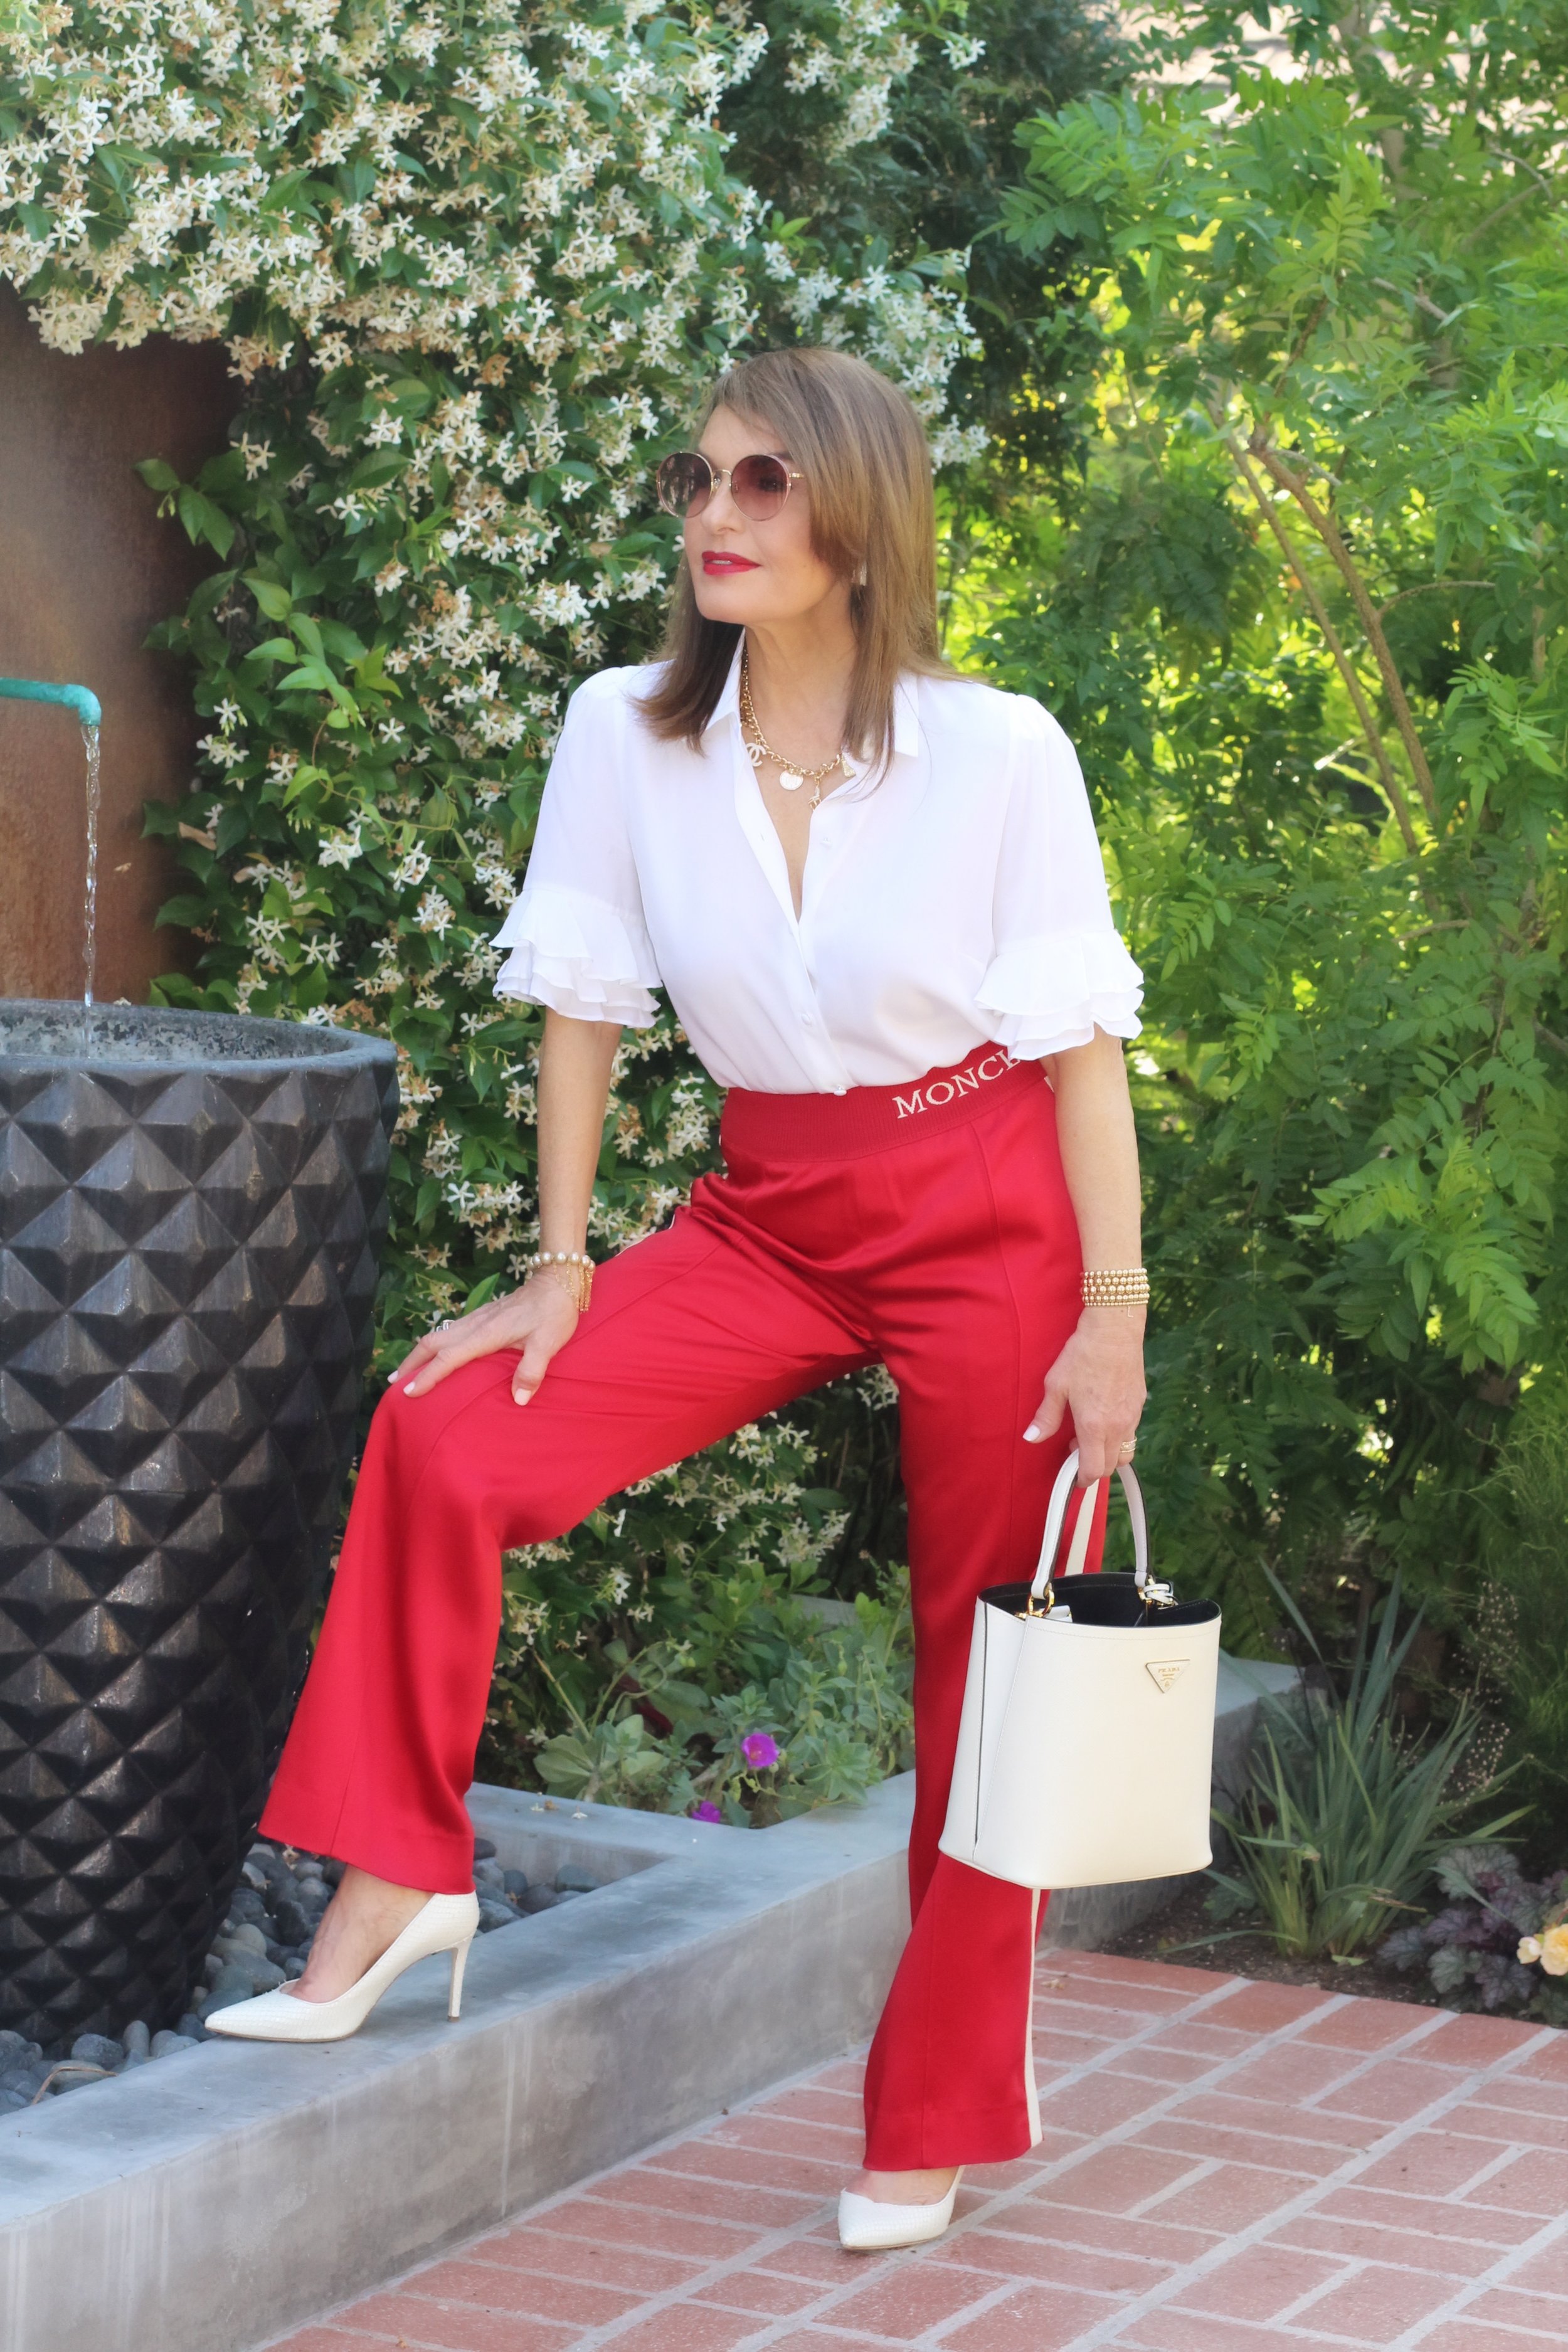 Frame Blouse, Moncler Pants, Giuseppi Zanotti Shoes, Prada Handbag, Jewels by Molly Stretch Beaded Bracelets (left wrist), Anne Sisteron Pearl Stretch Bracelet (right wrist), Cathryn Wagner Necklace, Gucci Sunglasses, By Terry Red Carpet #9 Lip Color.